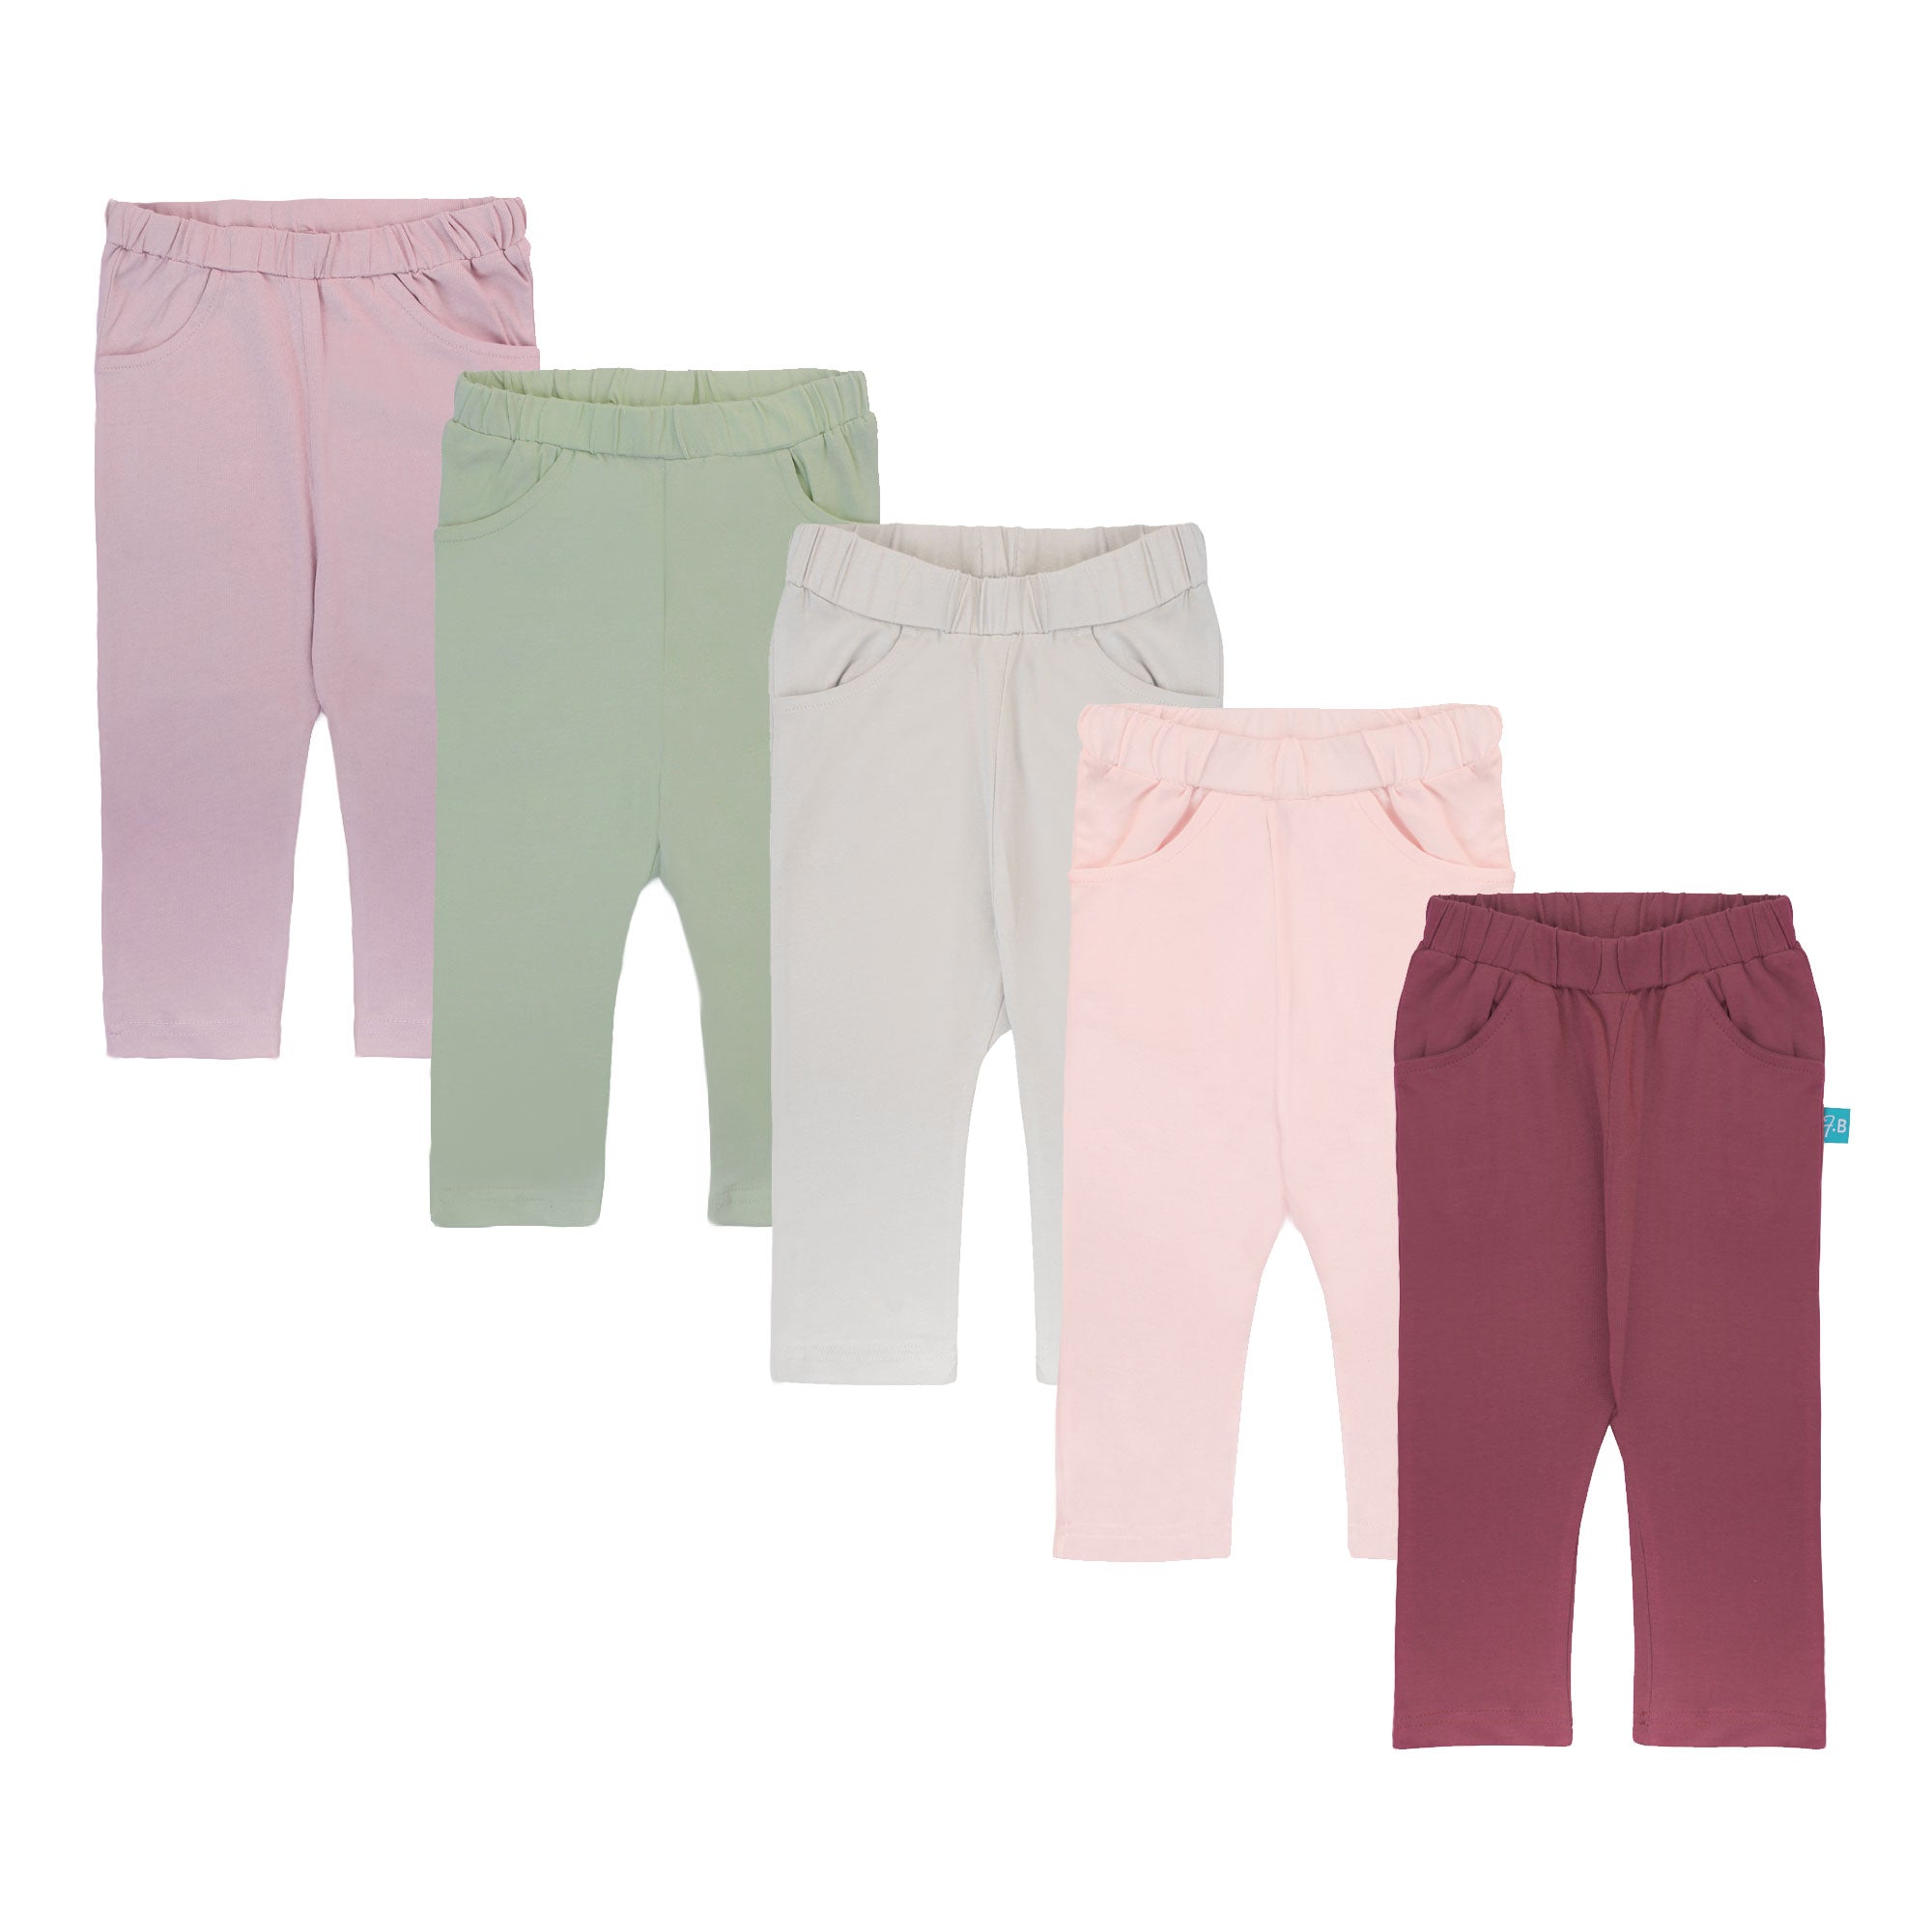 FS-447 Baby Girl 5-Pack Cotton Pants